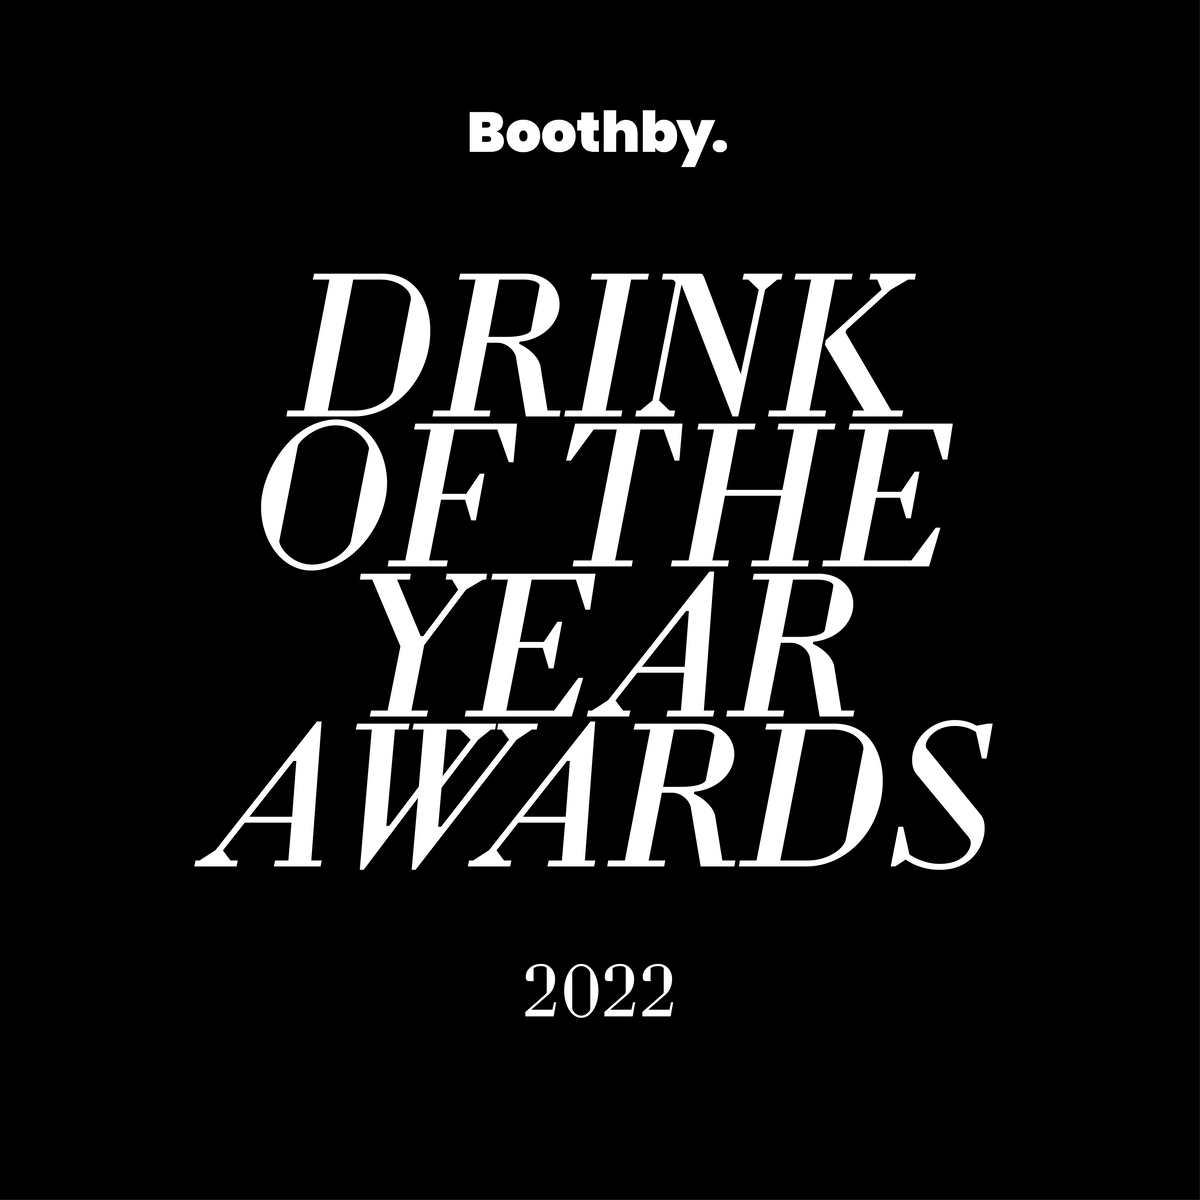 Introducing the Boothby Drink of the Year Awards — entries open October 1st